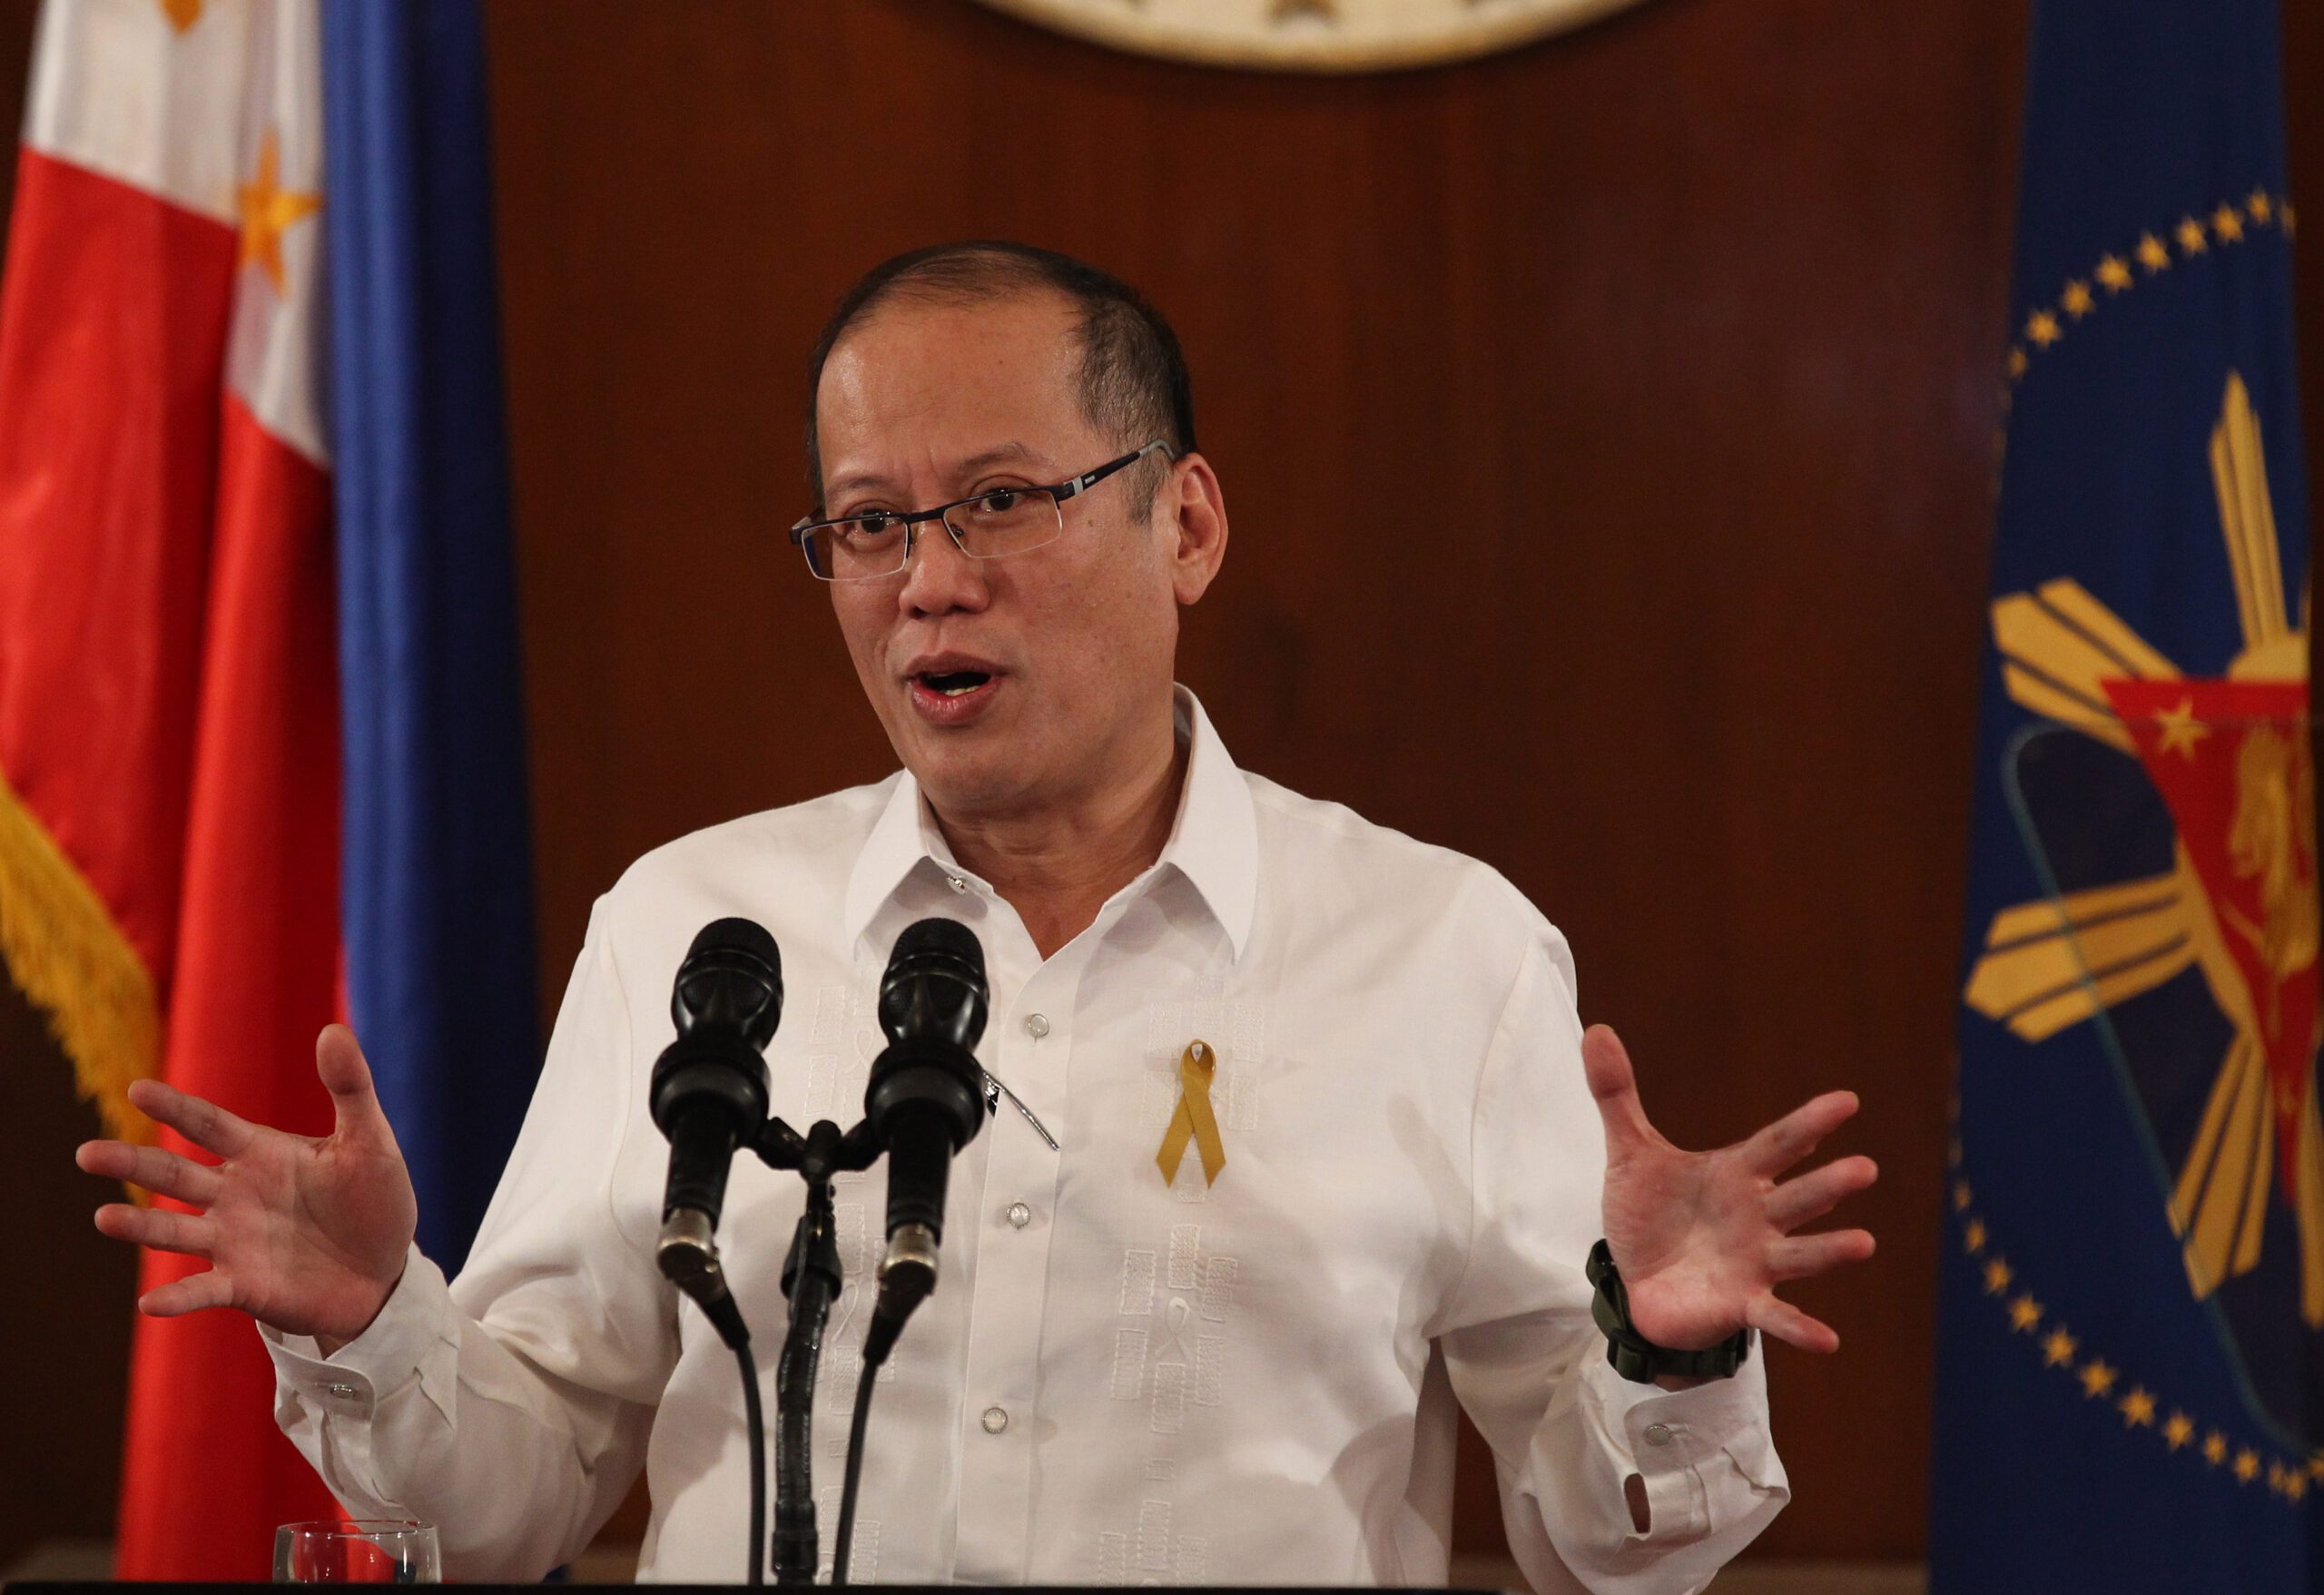 Aquino retains foreign investments limitations